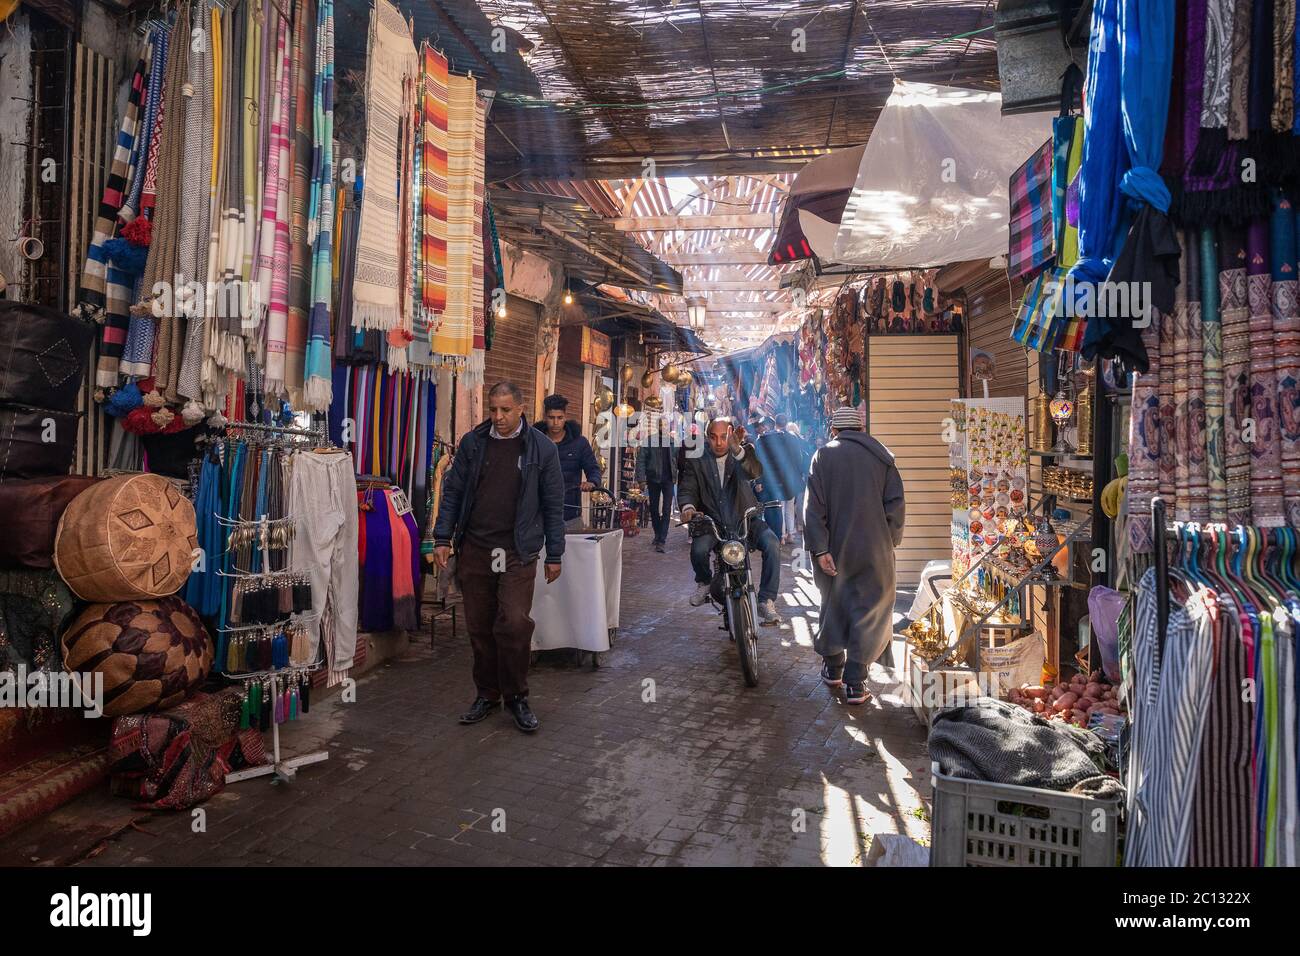 Souks, shoppers and tourists inside the medina with daylight streaming in in Marrakech, Morocco Stock Photo